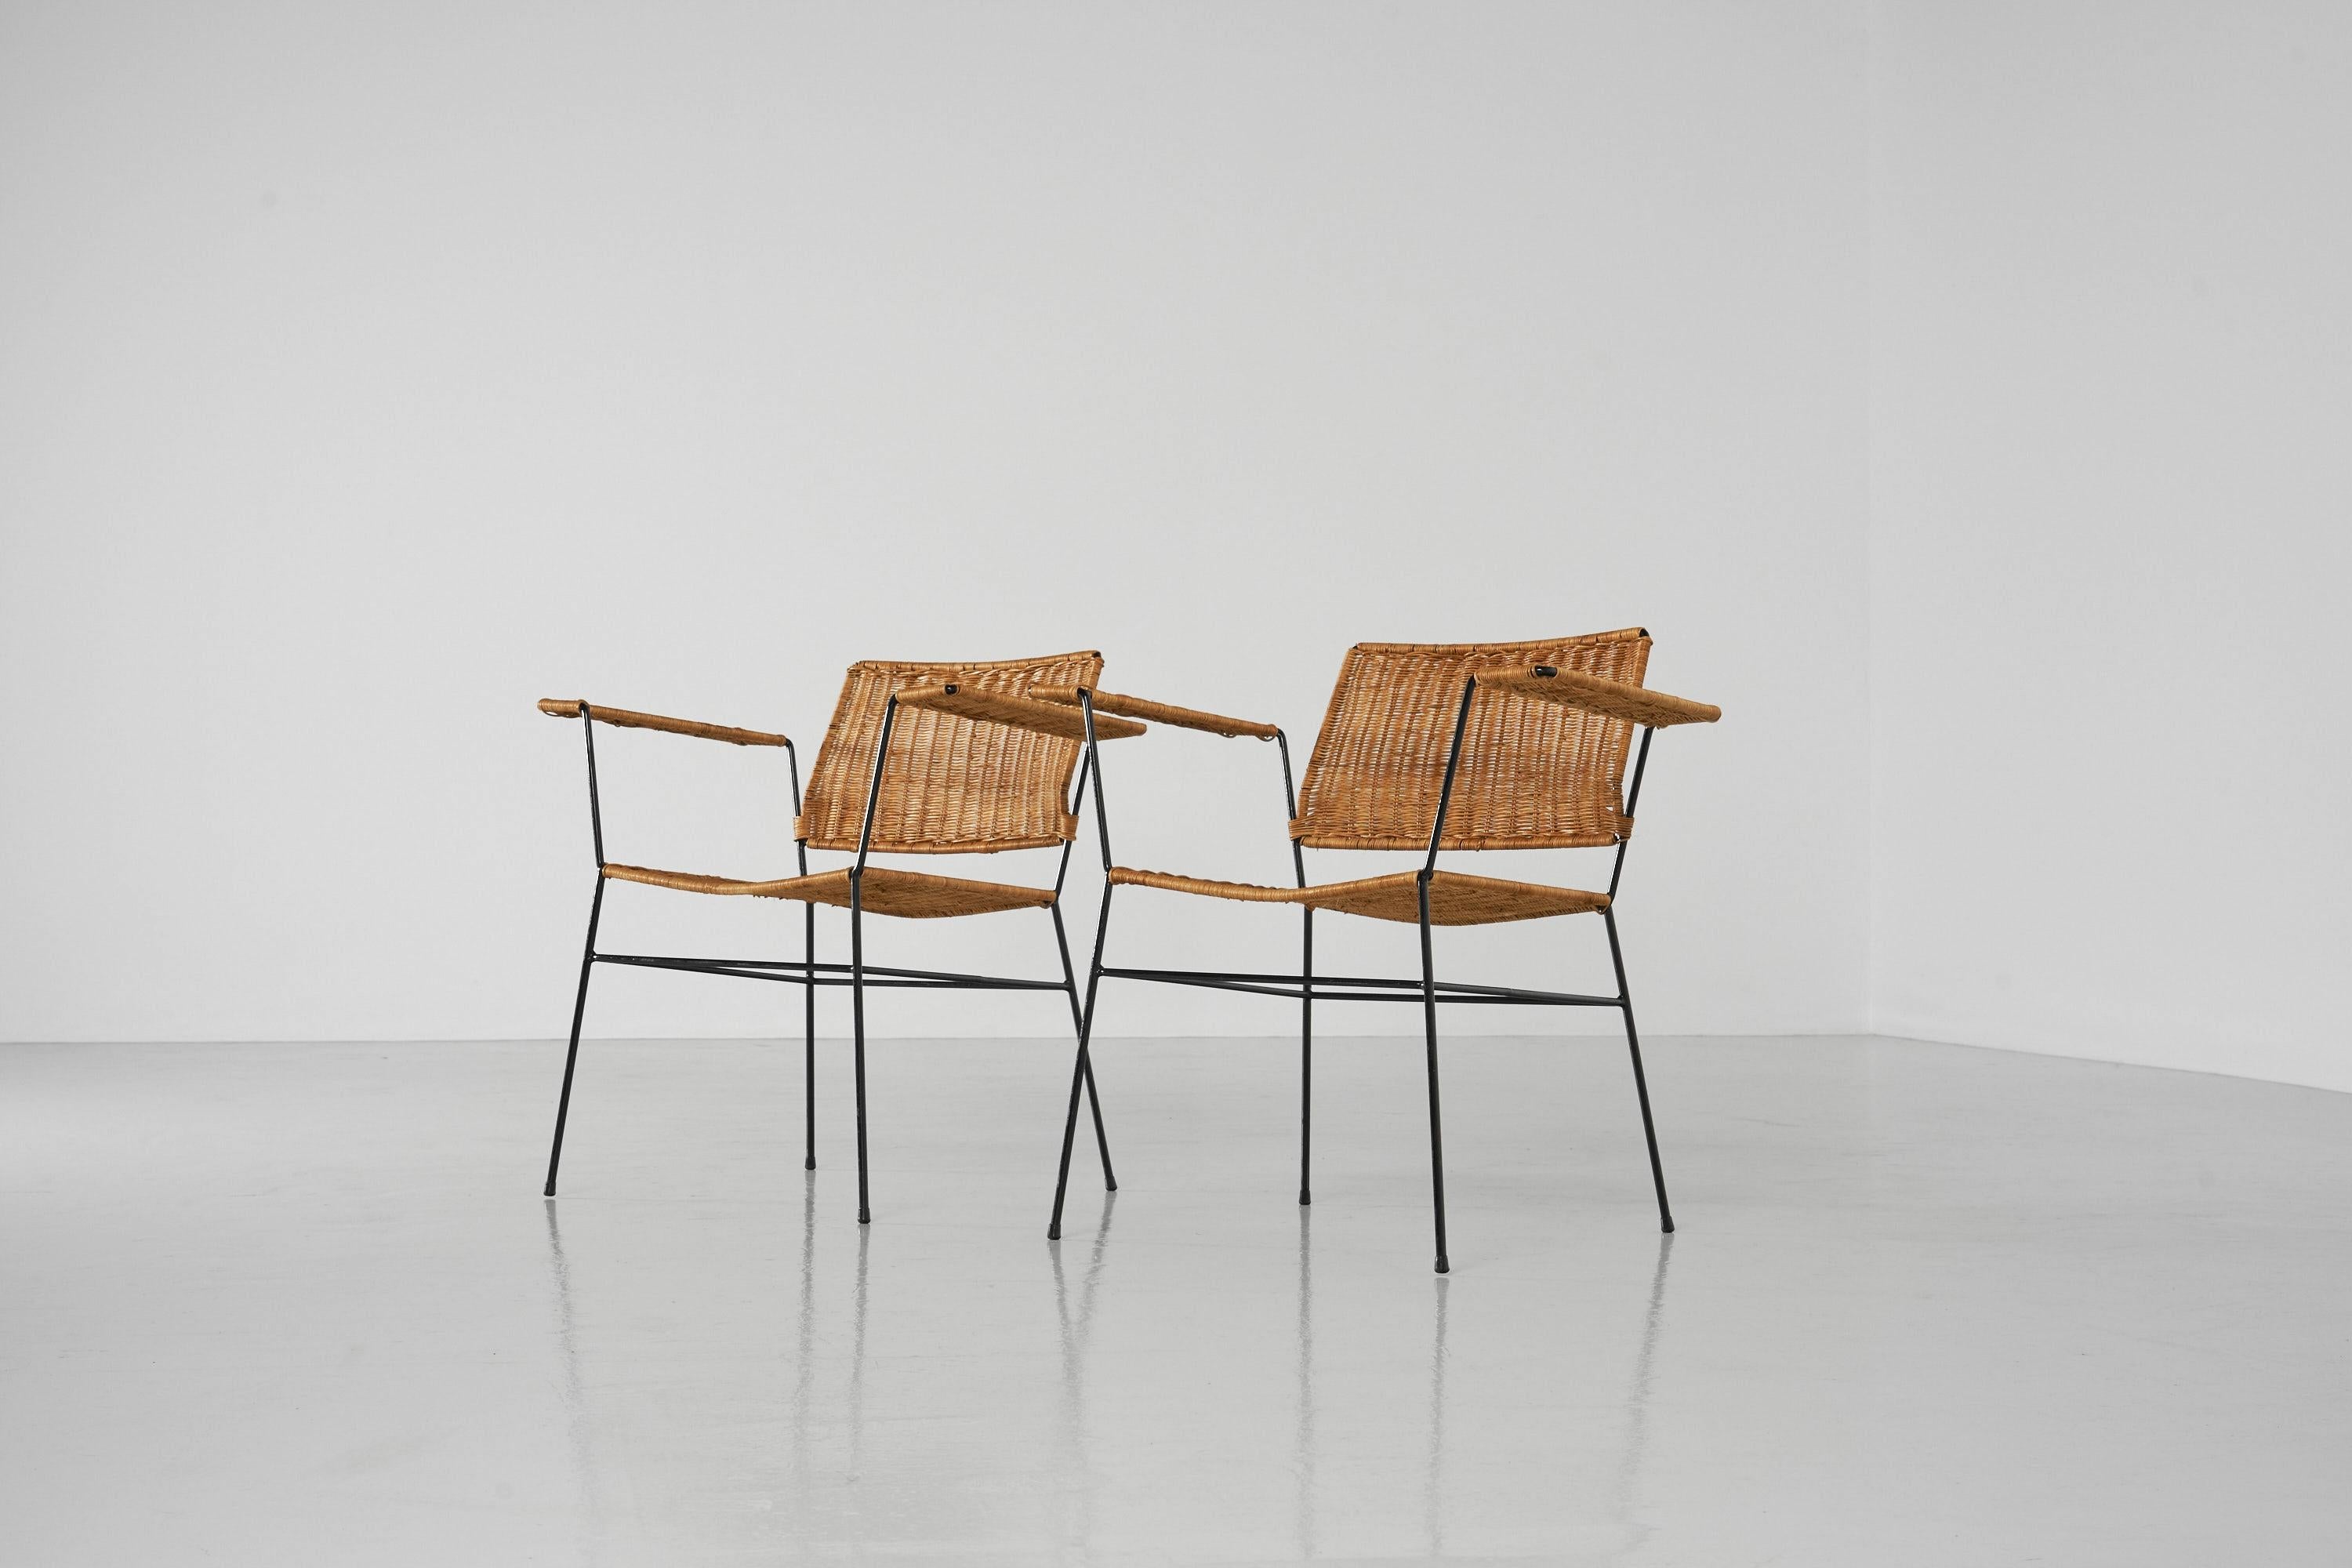 Metal Herta Maria Witzemann Cane Armchairs Pair Germany, 1954 For Sale